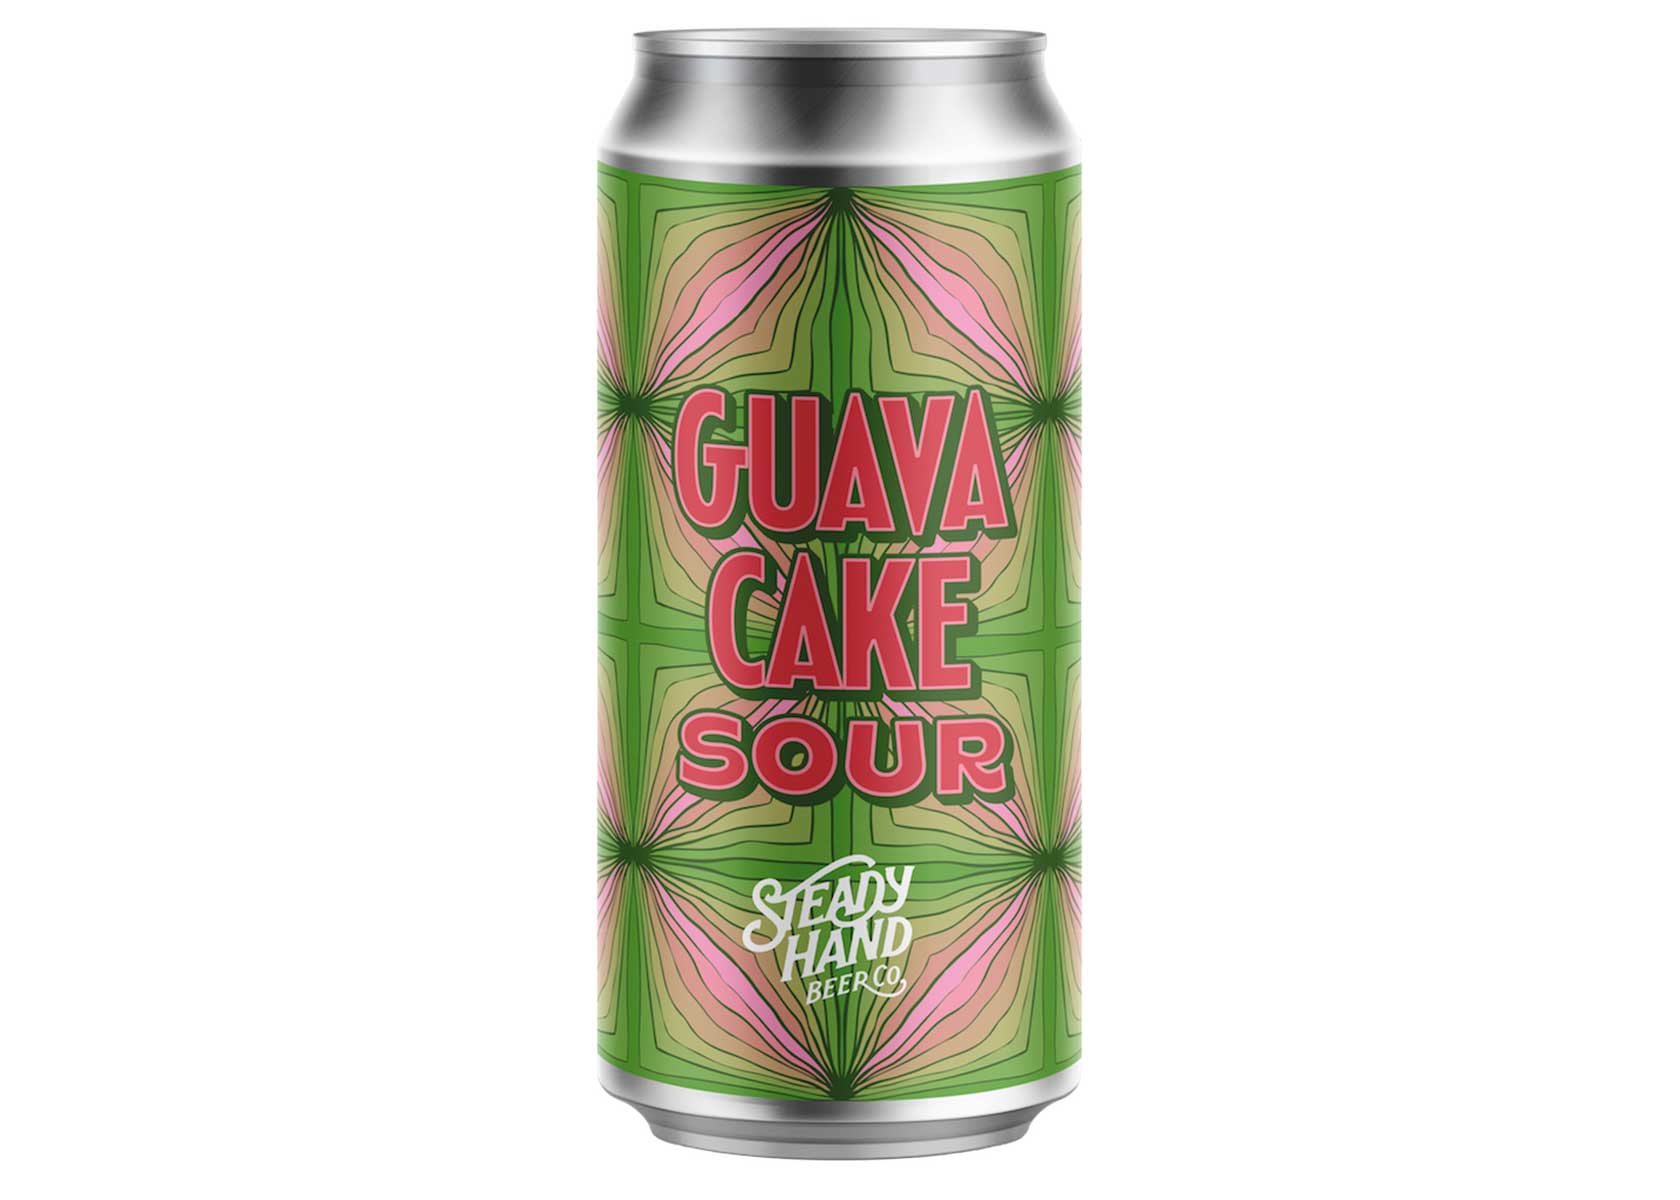 Steady Hand Guava Cake Sour